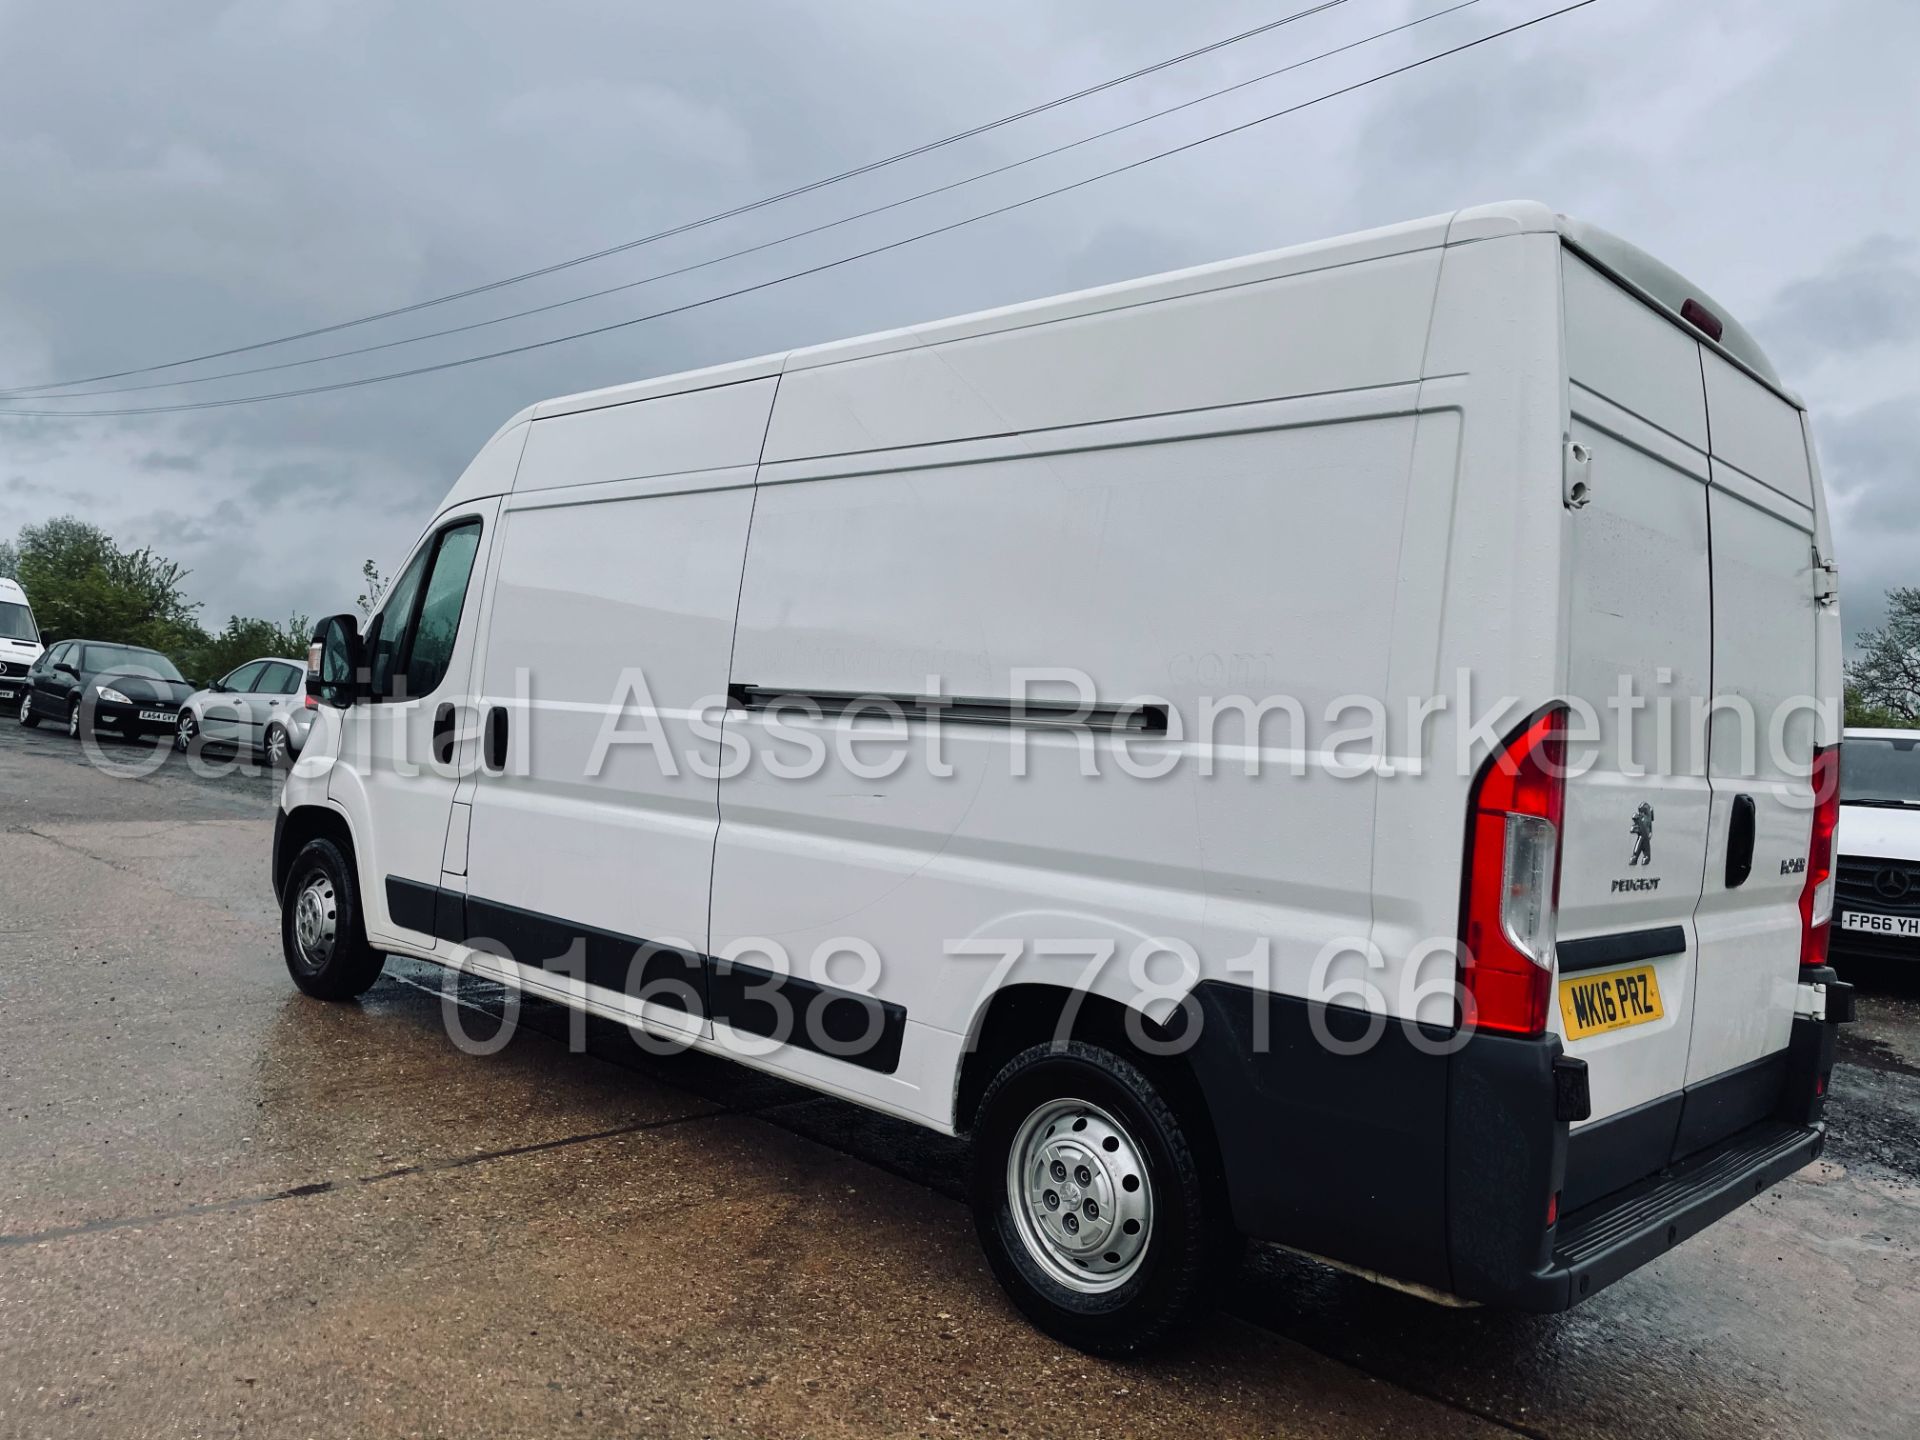 (On Sale) PEUGEOT BOXER 335 *PROFESSIONAL* LWB HI-ROOF (2016) '2.2 HDI - 6 SPEED' *A/C* (1 OWNER) - Image 9 of 41